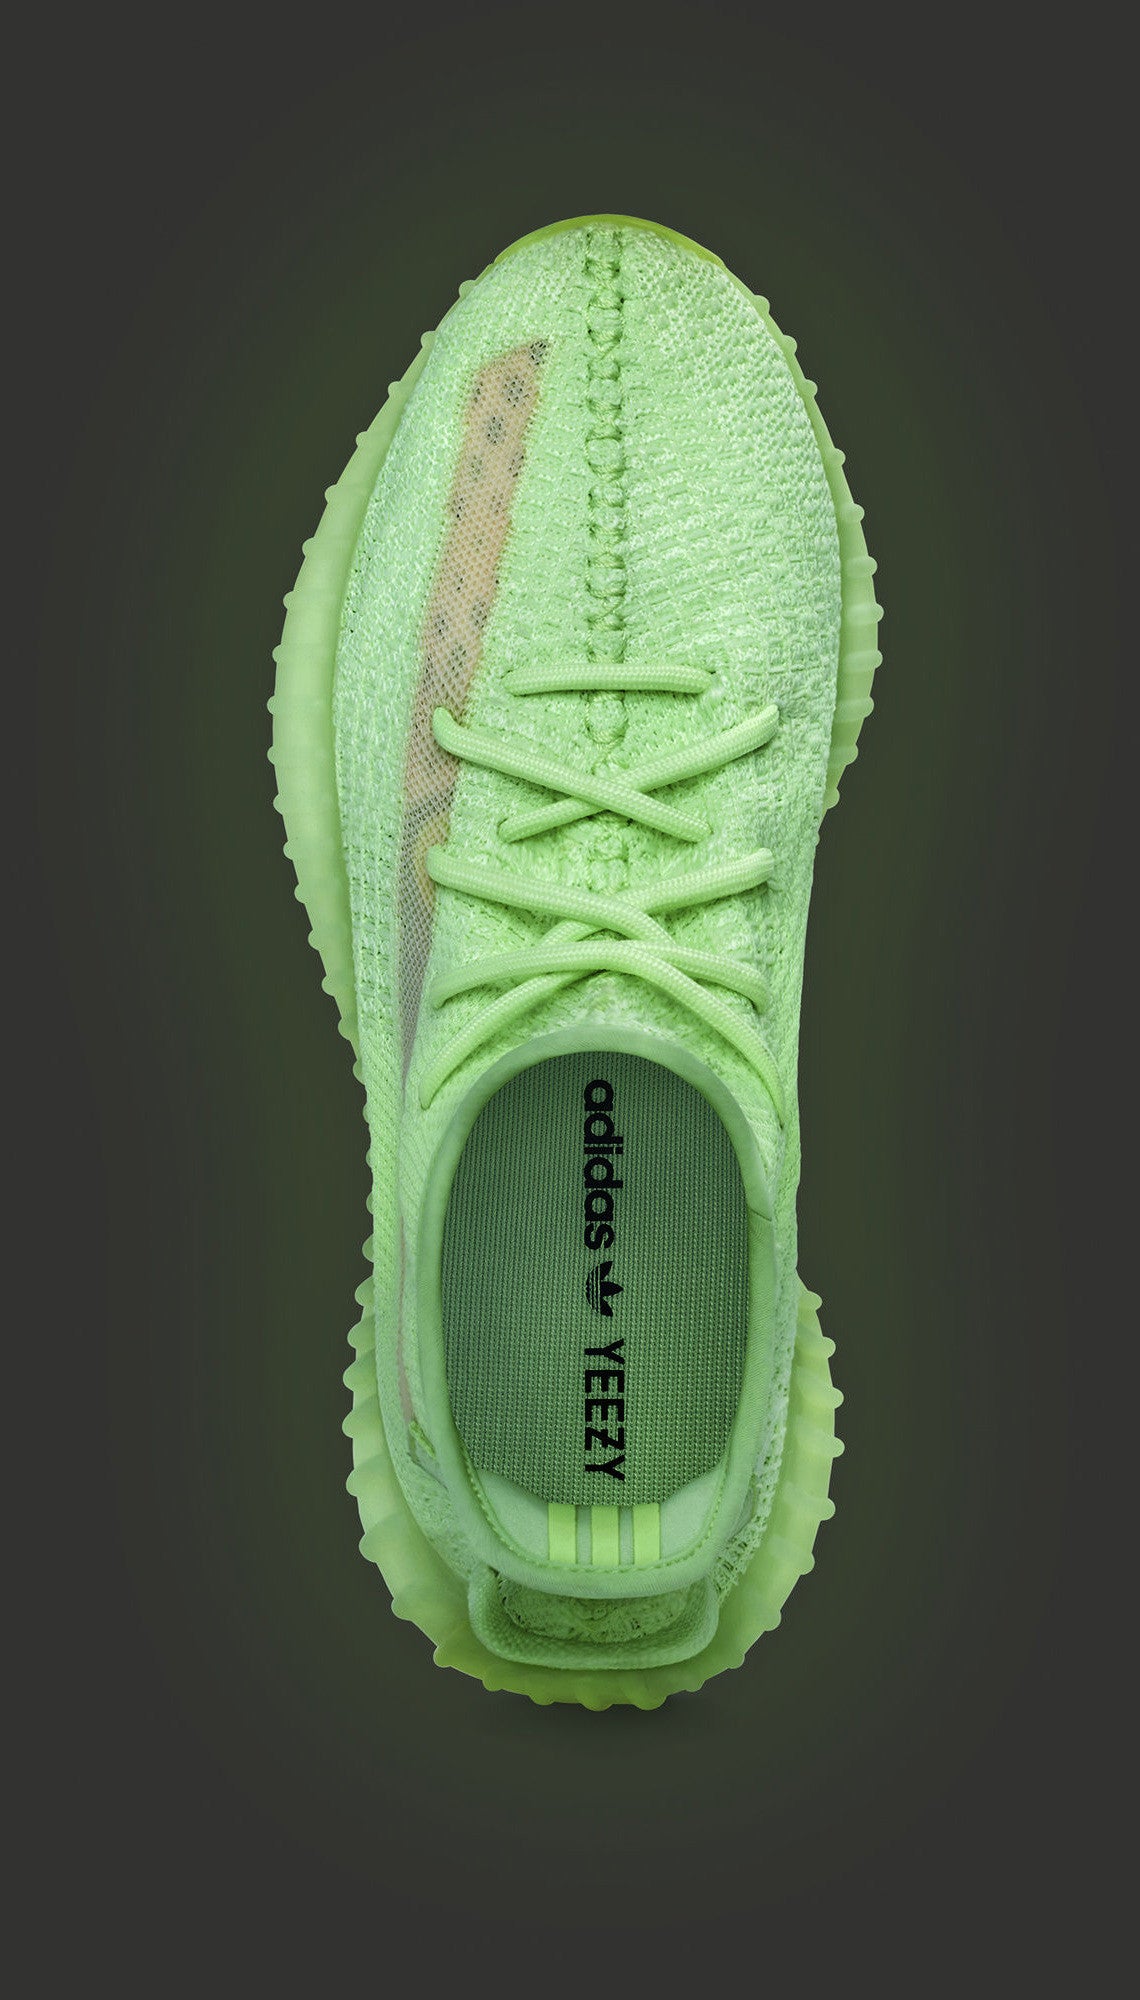 adidas yeezy boost 350 v2 glow mens stores